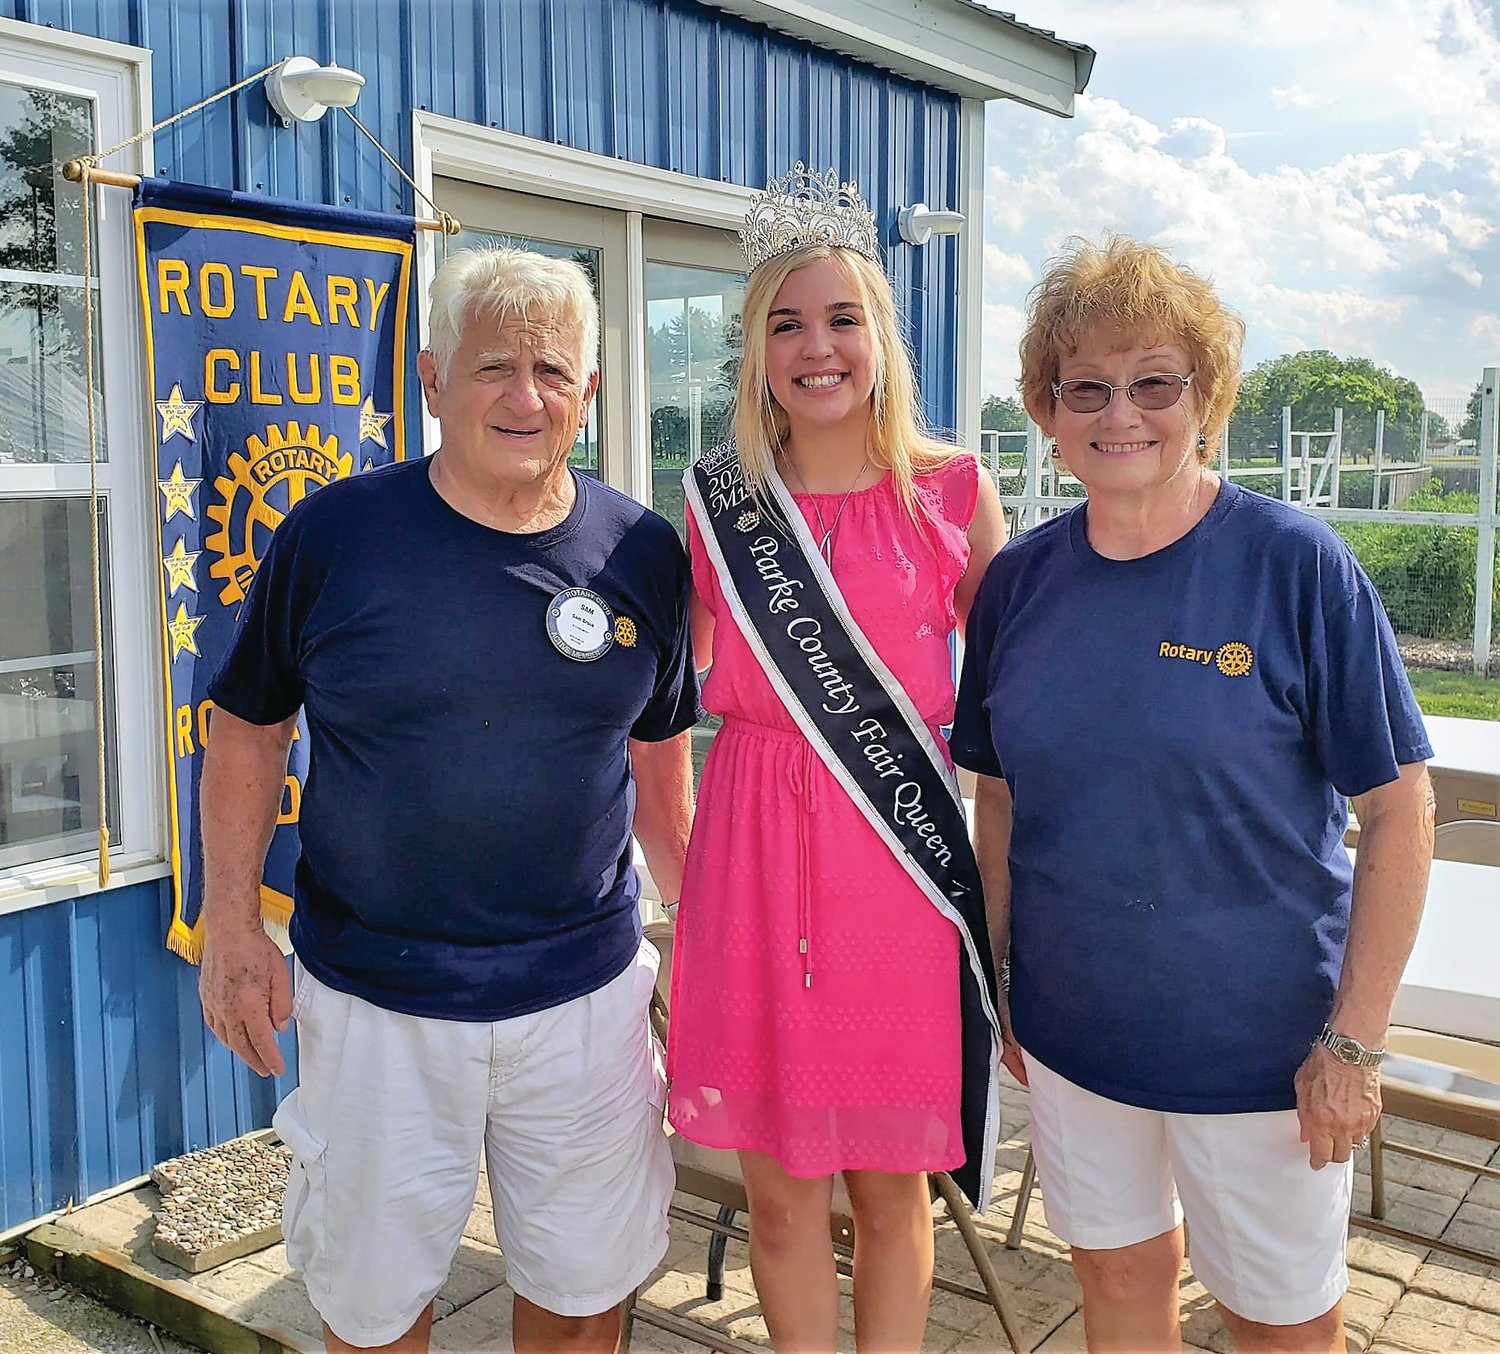 Among the special guests at the recent Rotary Community Garden picnic was the newly crowned Parke County 4-H Fair queen, Natalie Harkrider, center, who was sponsored by Rotary in the pageant. Shown with the 4-H Fair queen are Rotarians Sam Brook, left, and Judy Brook, who are members of the leadership team for the garden.